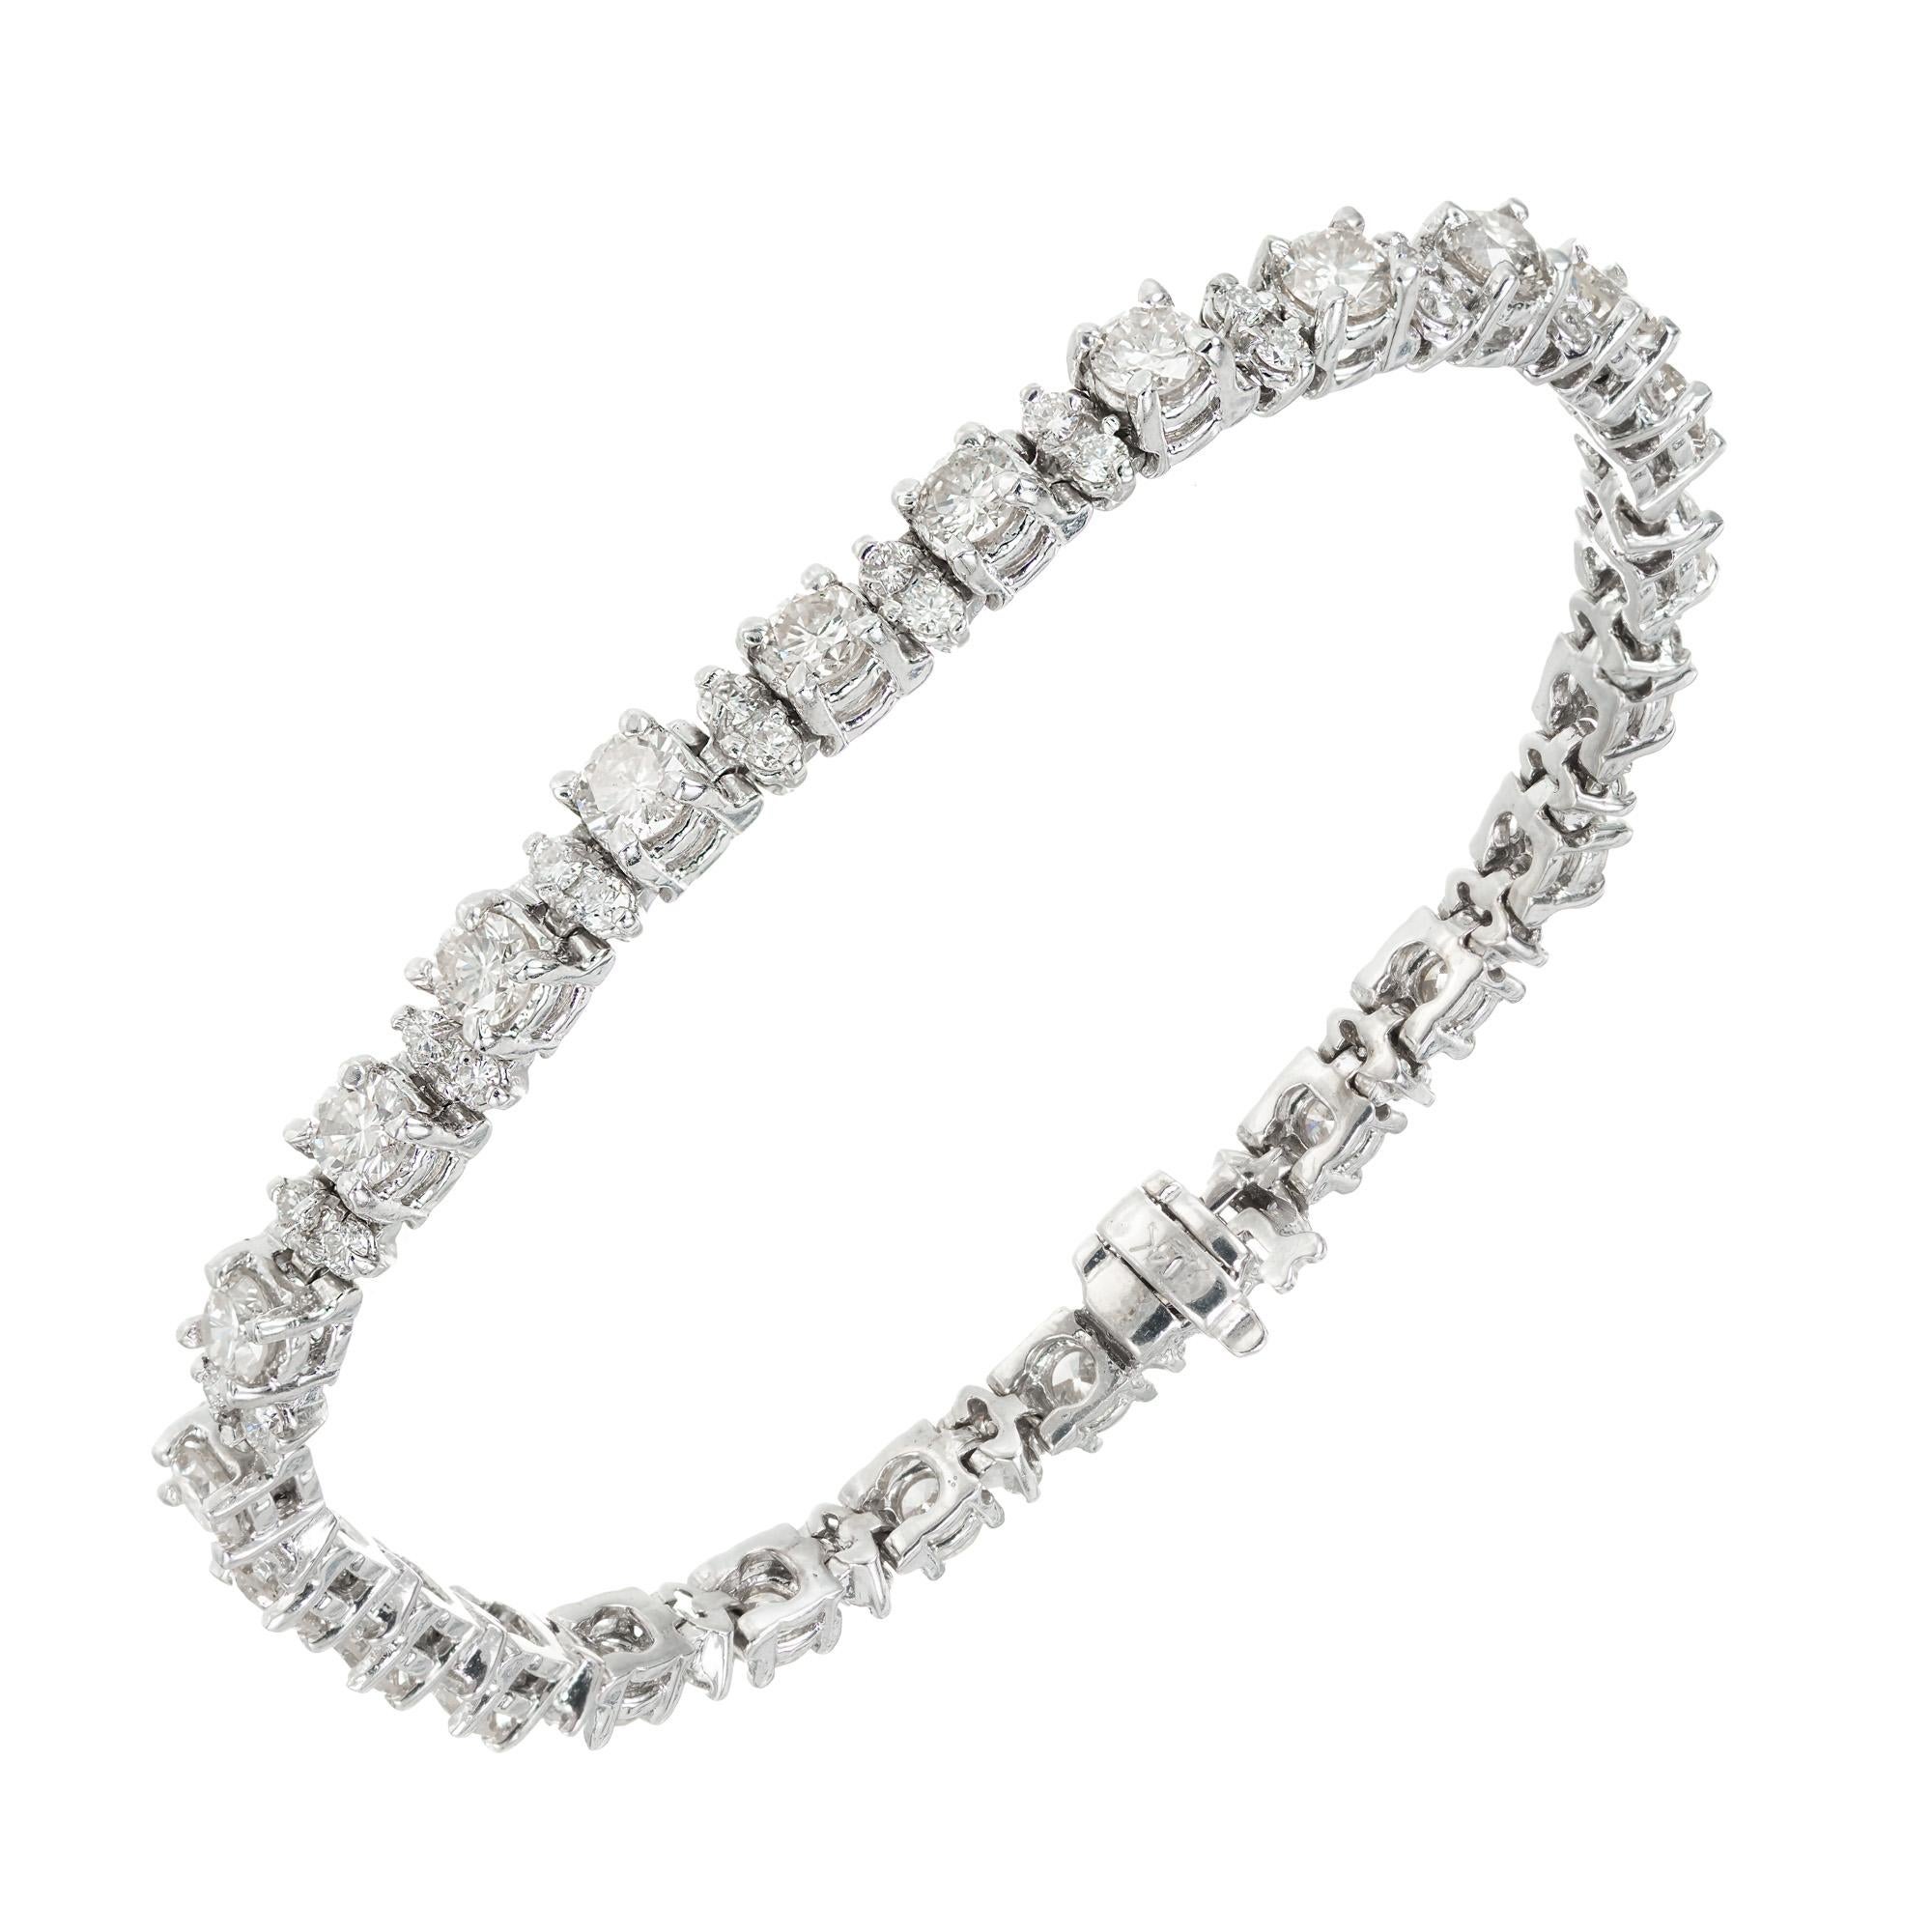 Diamond tennis bracelet. 75 round brilliant cut diamonds set in 14k white gold tennis bracelet. Larger diamonds are each separated with 2 small diamonds. Hinged link bracelet with secure hidden catch and underside safety catch. 7.25 in length. 

25